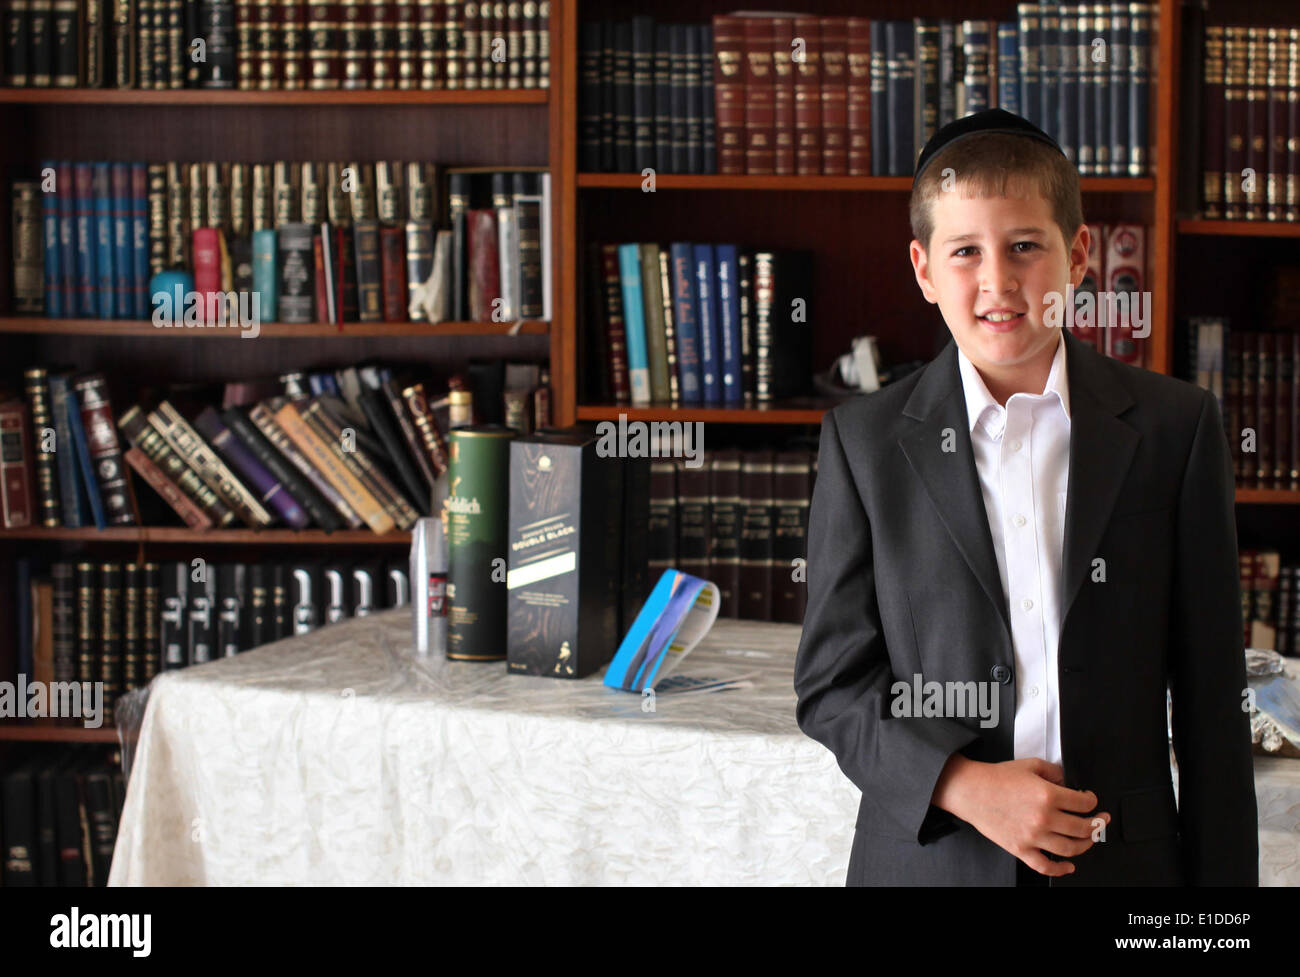 (140601) -- JERUSALEM, June 1, 2014 (Xinhua) -- Tzviel Noyman stands in front of book shelves at his home in Beit Shemesh, about 20 km from Jerusalem, on May 30, 2014. Tzviel Noyman is an Israeli Ultra-Orthodox boy in a family with six children, three boys and three girls. He is ten years old this year and a grade three pupil of Torat Moshe elementary school, which is only opened to Jewish children. Tzviel has eight classes each day, including Hebrew, English, mathematics and Jewish religion, which has four classes each day including Talmud, Mishnah and Gemara. Tzviel likes the religion class Stock Photo